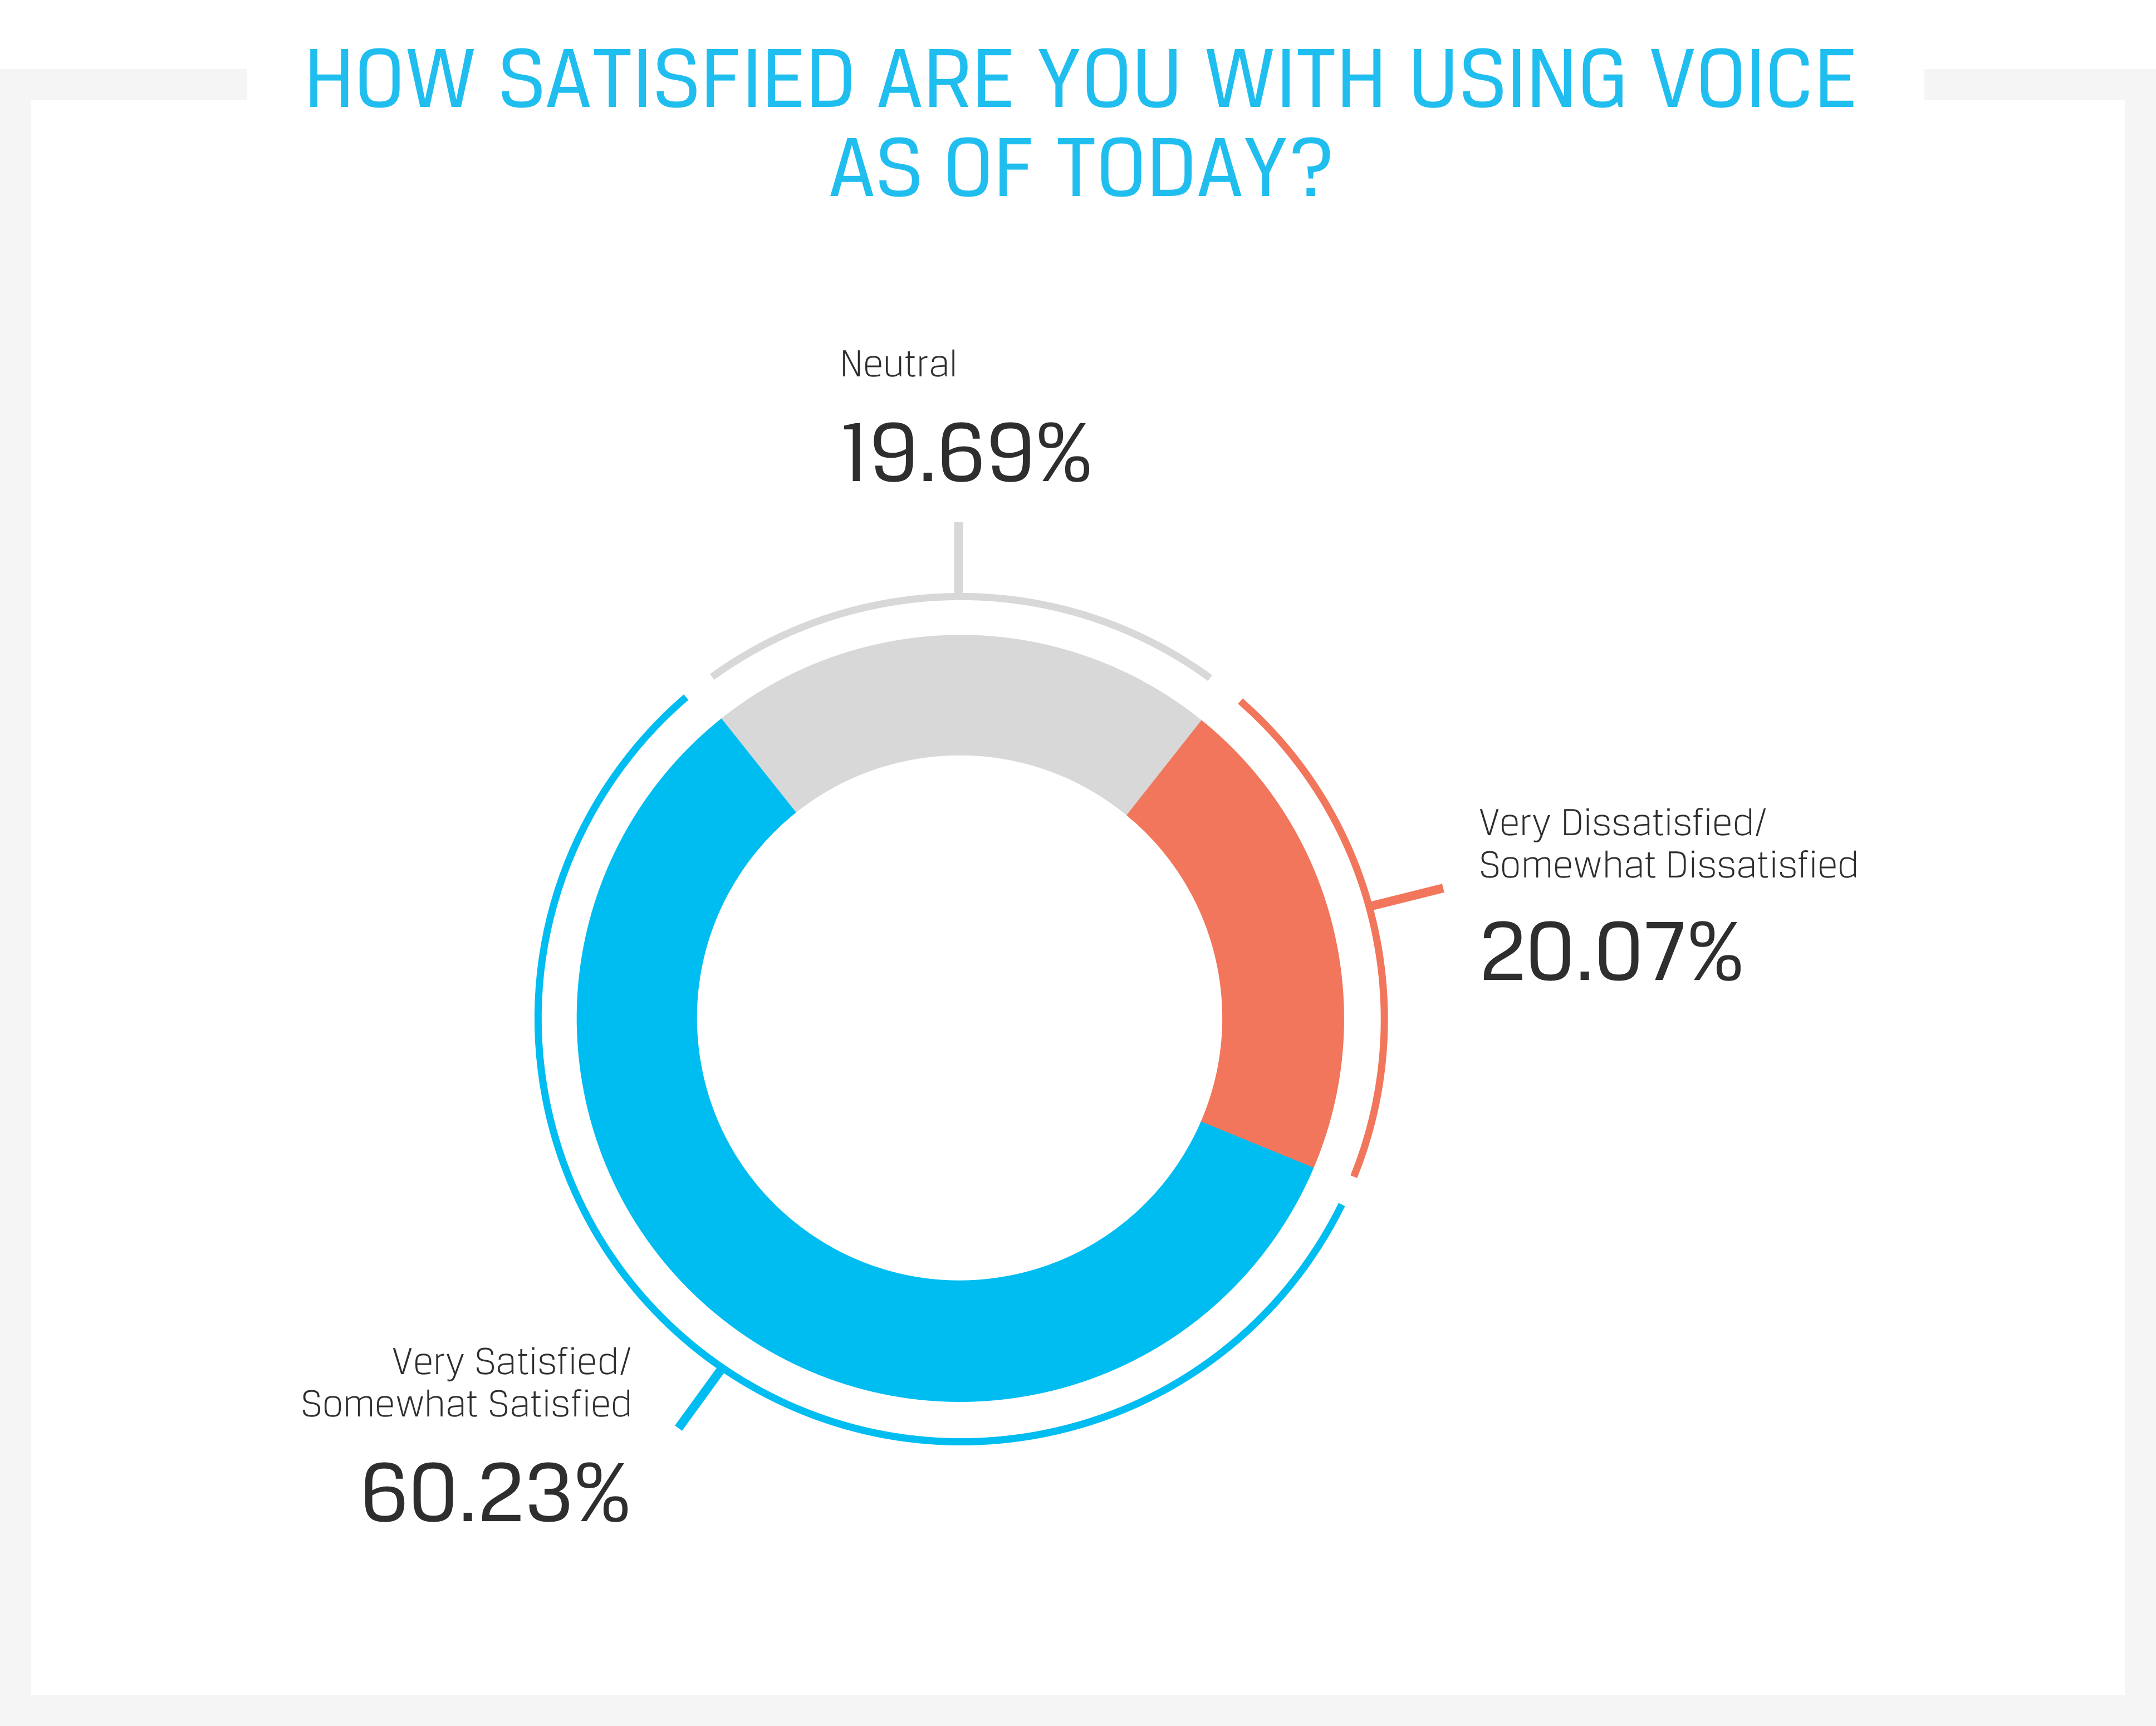 How satisfied are you with using voice as of today?